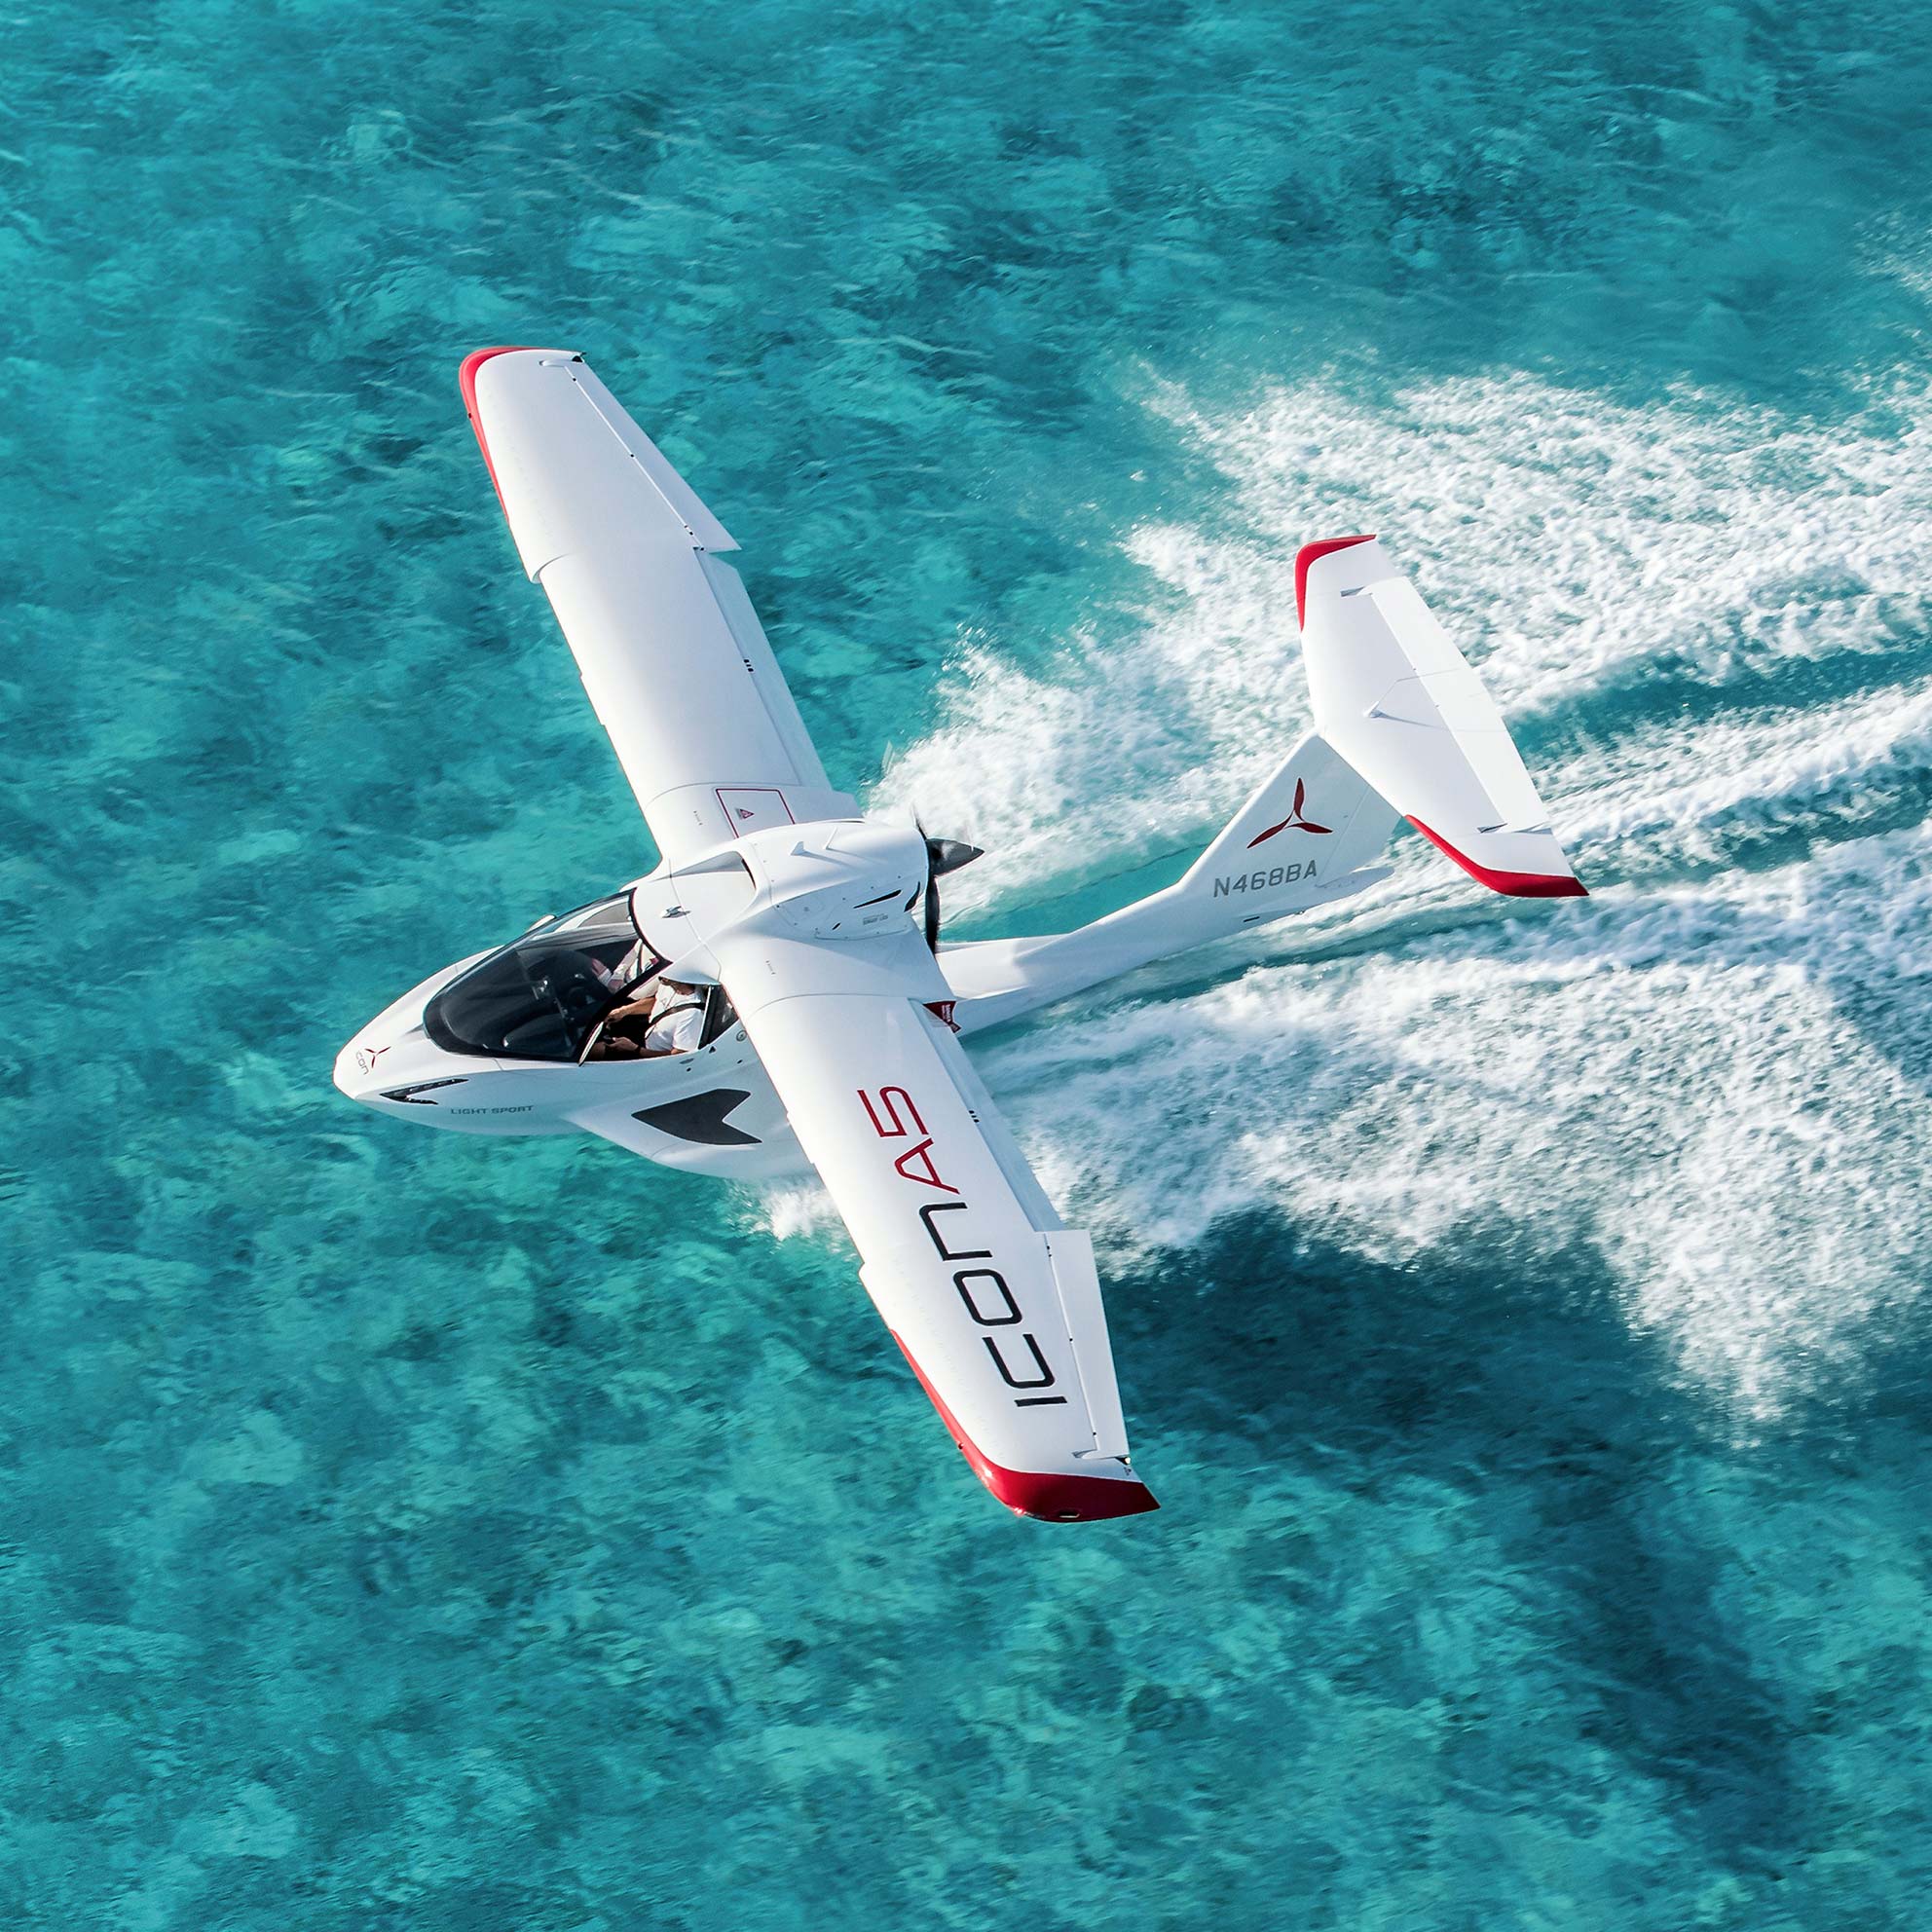 Icon A5 Specs Learn More About The Icon A5 Light Sport